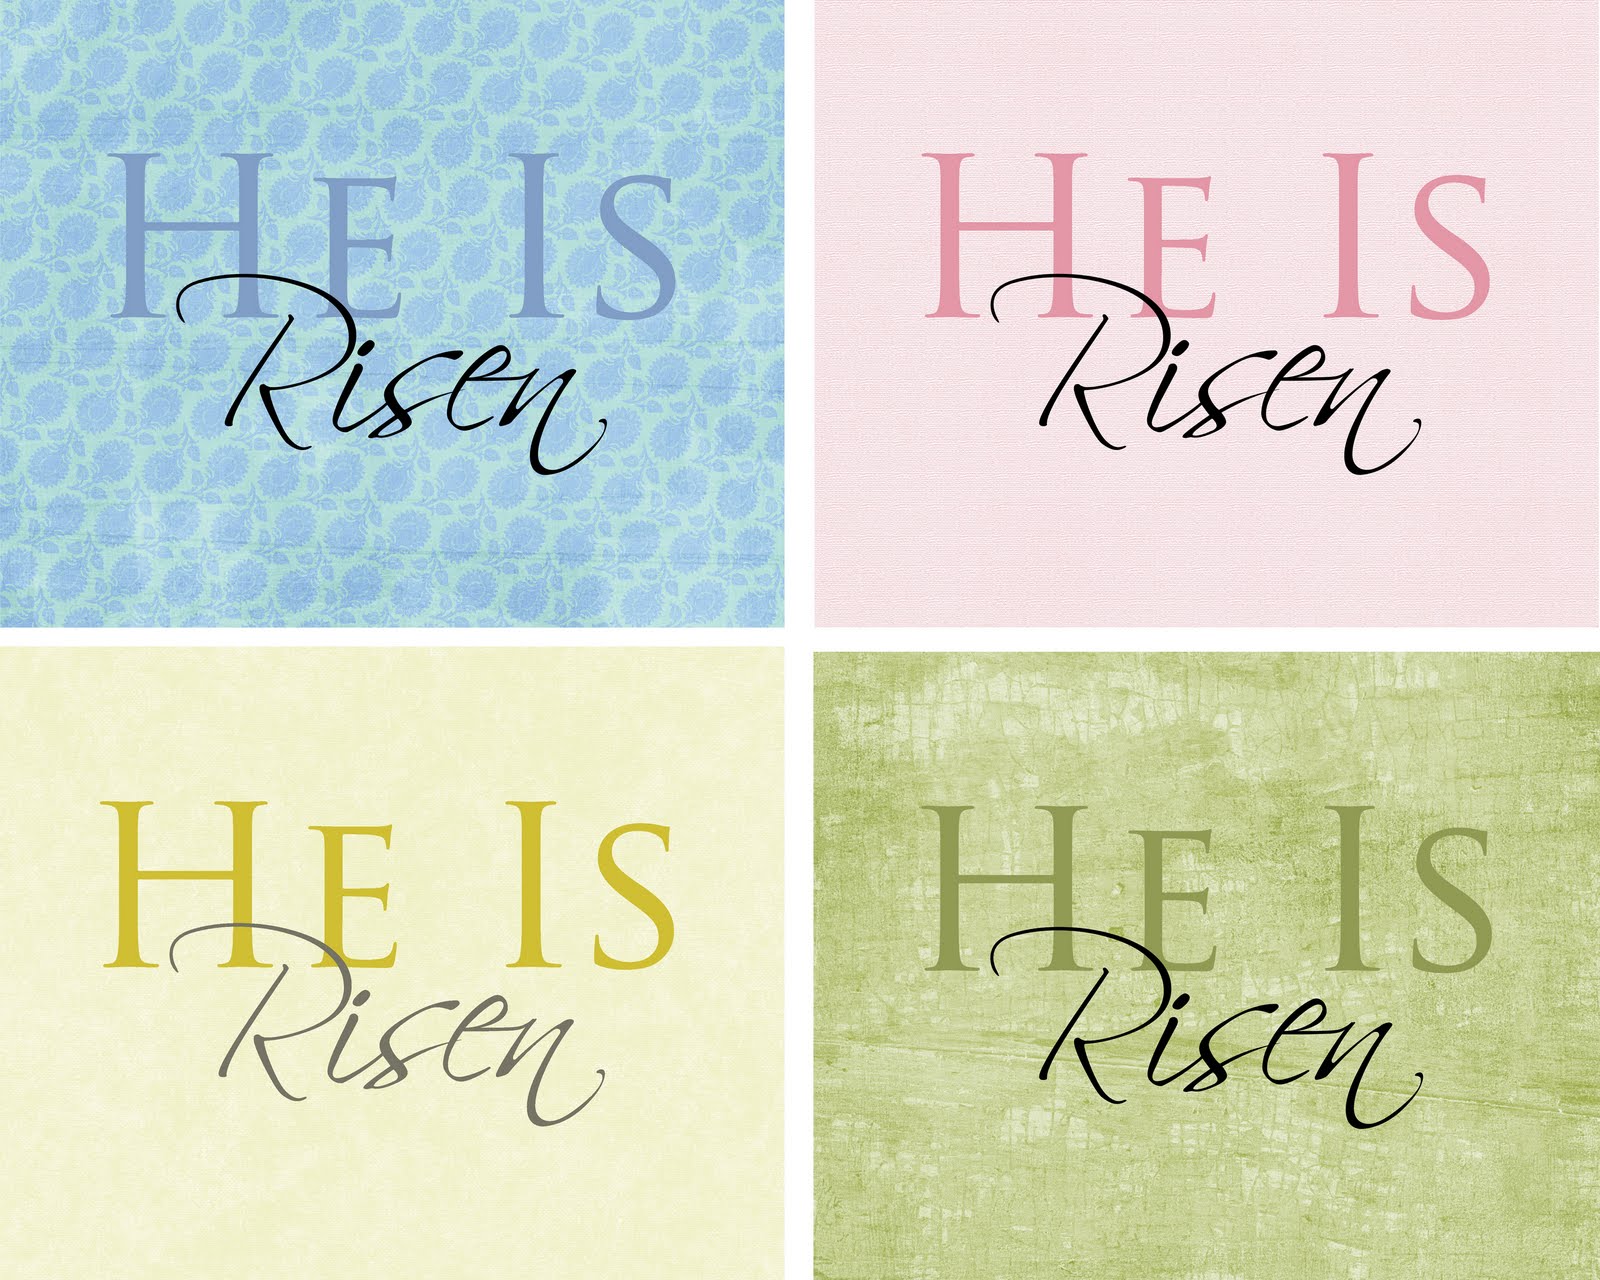 christian easter clipart free download - photo #35